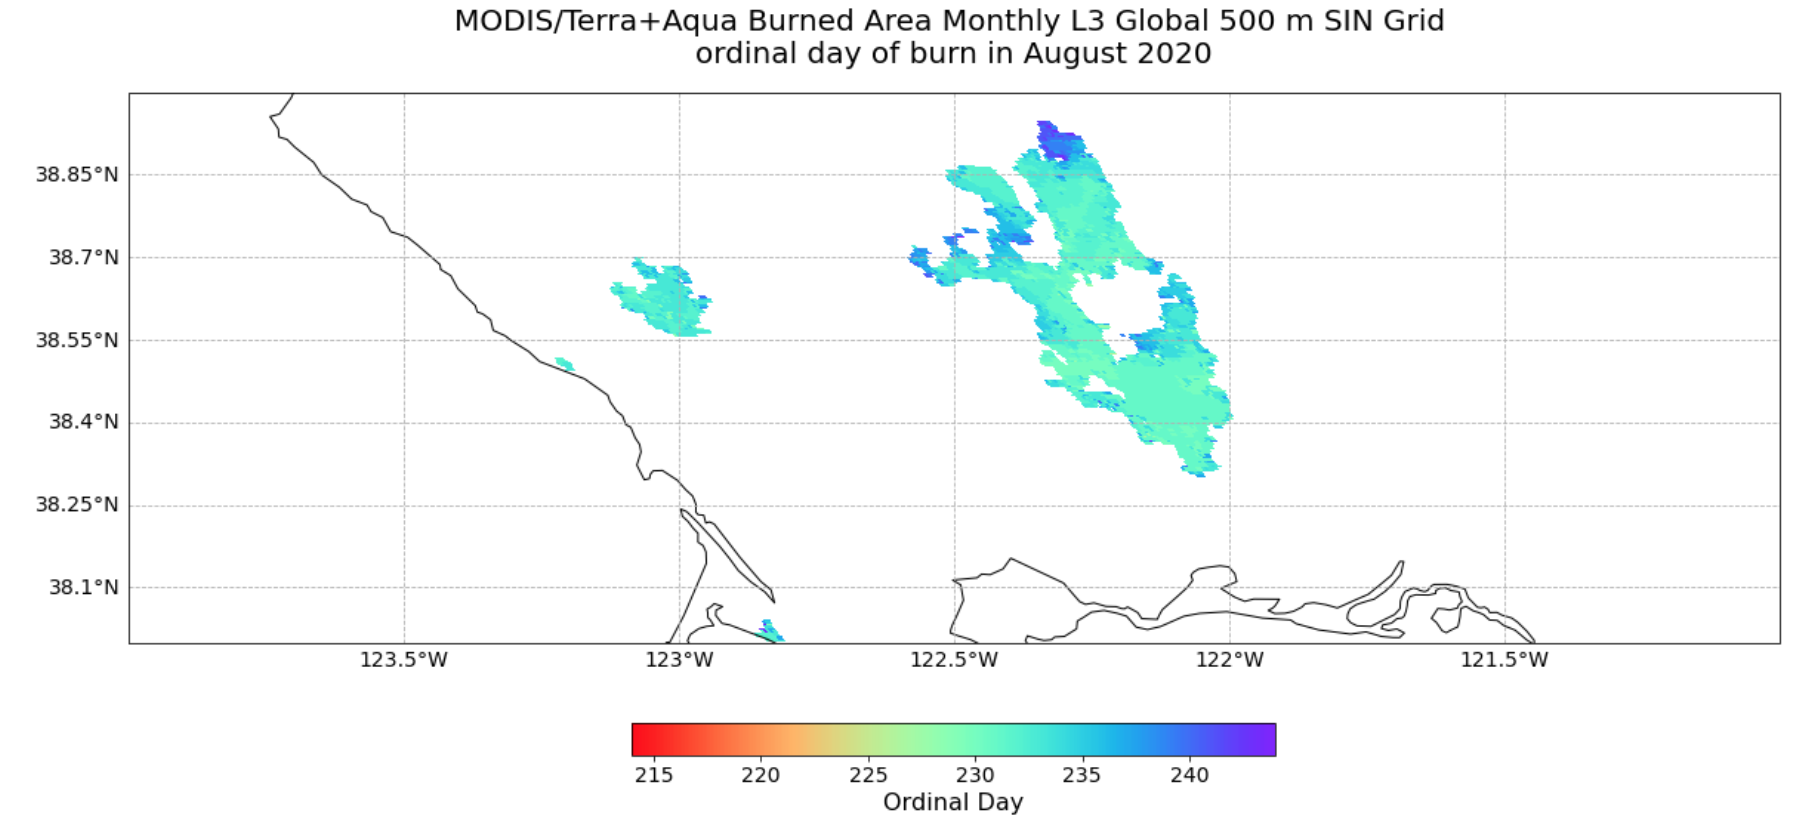 Figure 4. Burned area north of the San Pablo and Suisun bays coloured by the ordinal day of burn in August 2021 from the MODIS Burned Area Monthly Level 3 product.